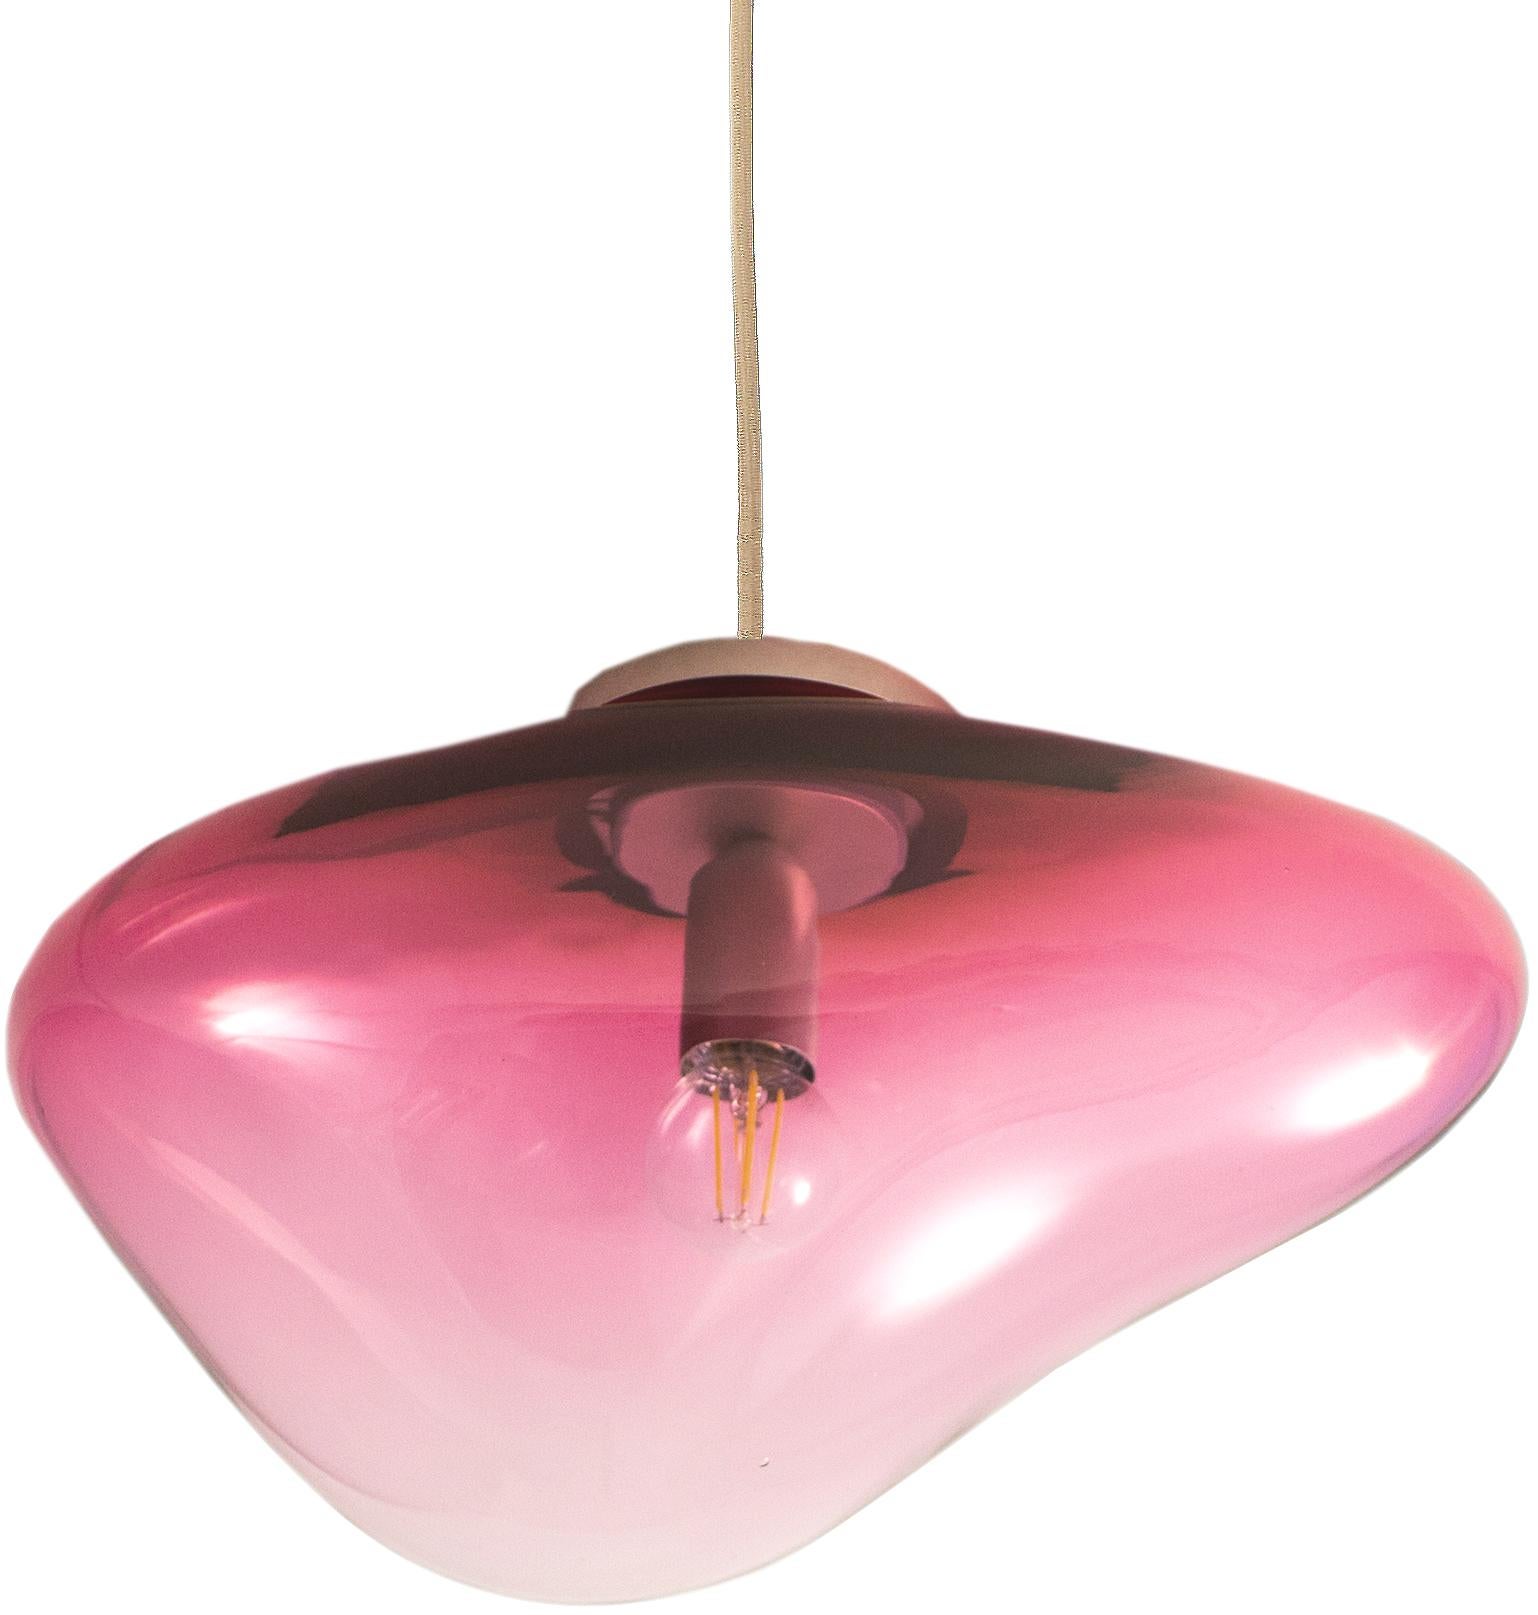 Planetoide Erosi Brilliant ruby pendant by ELOA
No UL listed 
Material: glass, steel, silver, LED bulb
Dimensions: D 30 x W 30 x H 250 cm
Also available in different colours and dimensions.

All our lamps can be wired according to each country. If